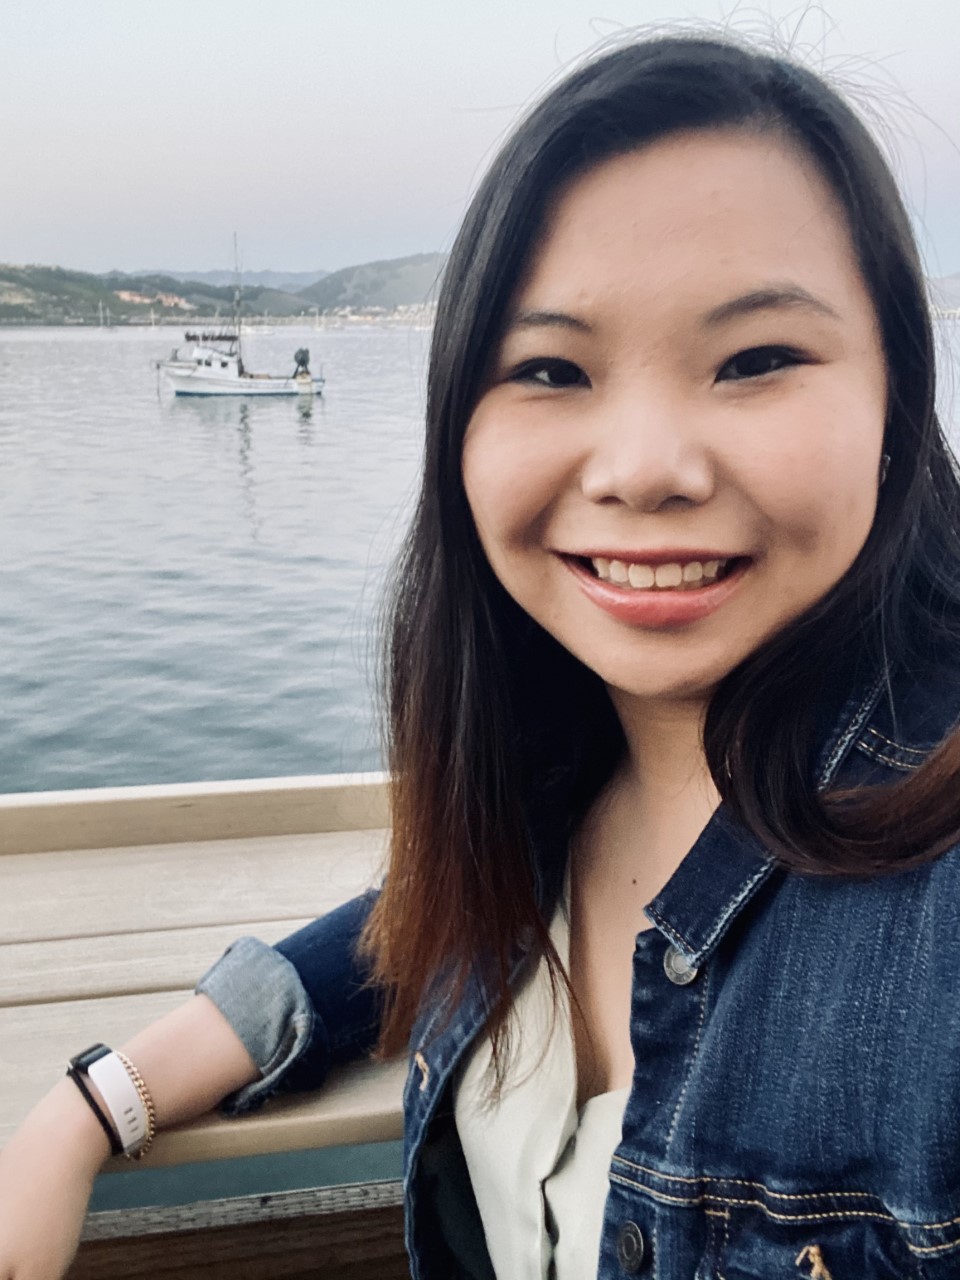 Photo of asian woman with dark hair, wearing a blue jean jacket, with a body of water in the background